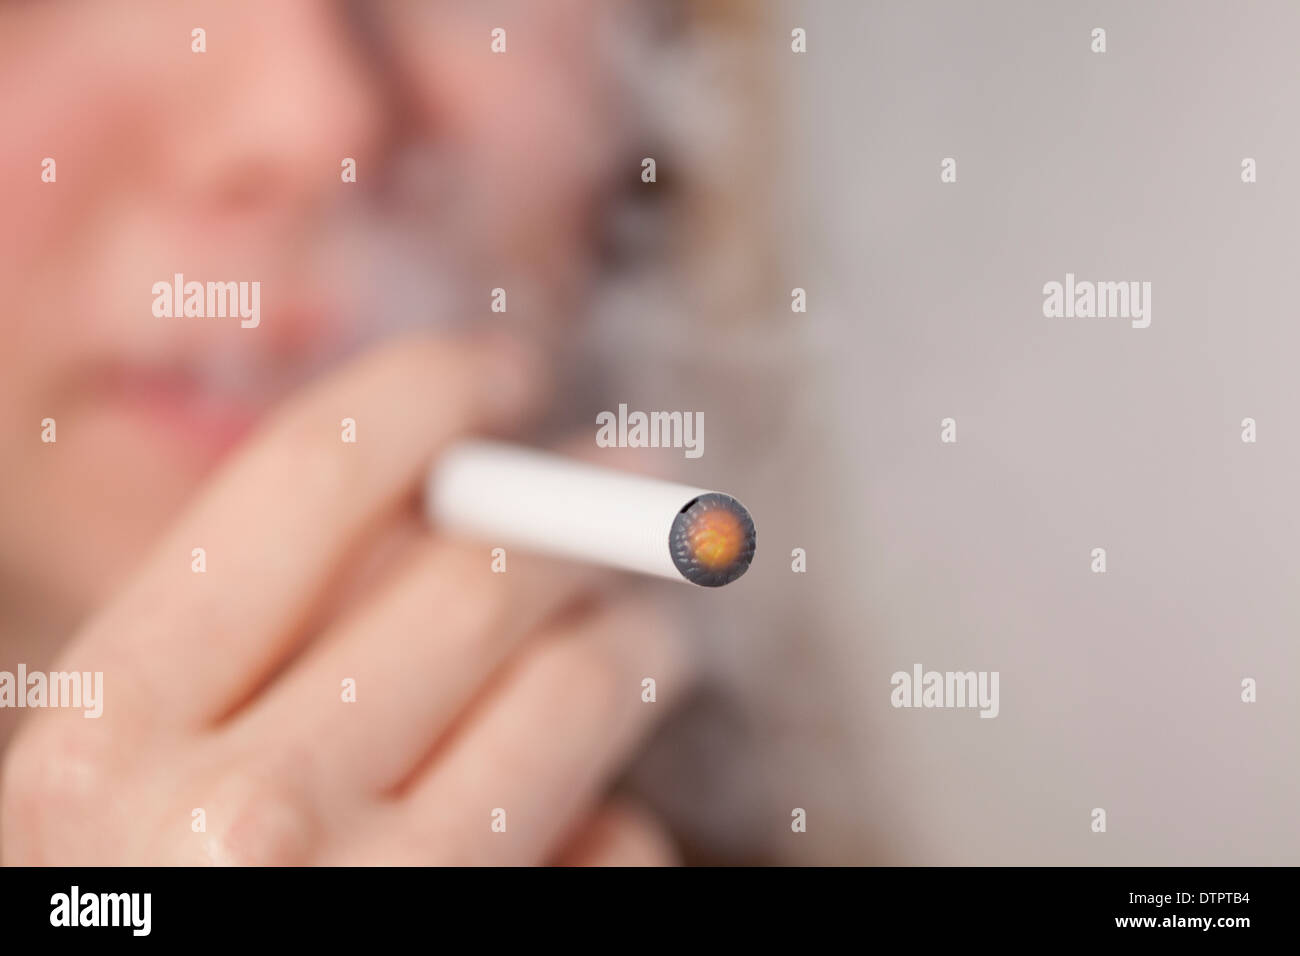 Young teenage girl smoking e or electronic cigarette, image is anonymous Stock Photo